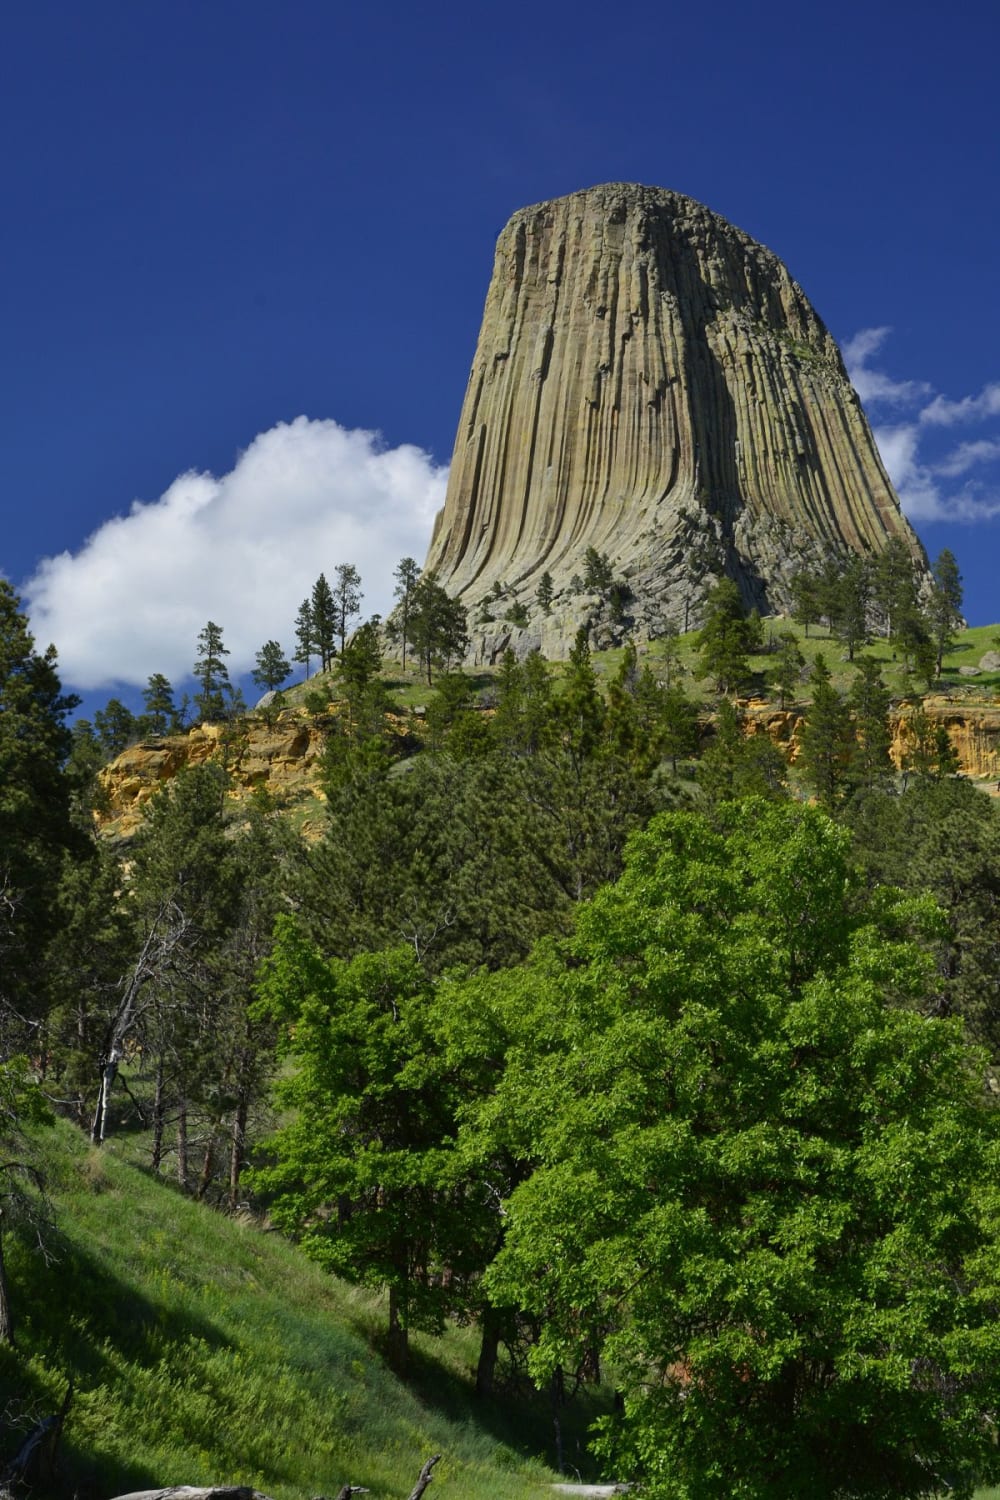 Stories shared by Tribal communities, especially those of the Great Plains & Black Hills region, indicate that the Tower was & still is a sacred site. Connections to this place are as important today as they were for generations before it became Devil’s Tower National Monument.